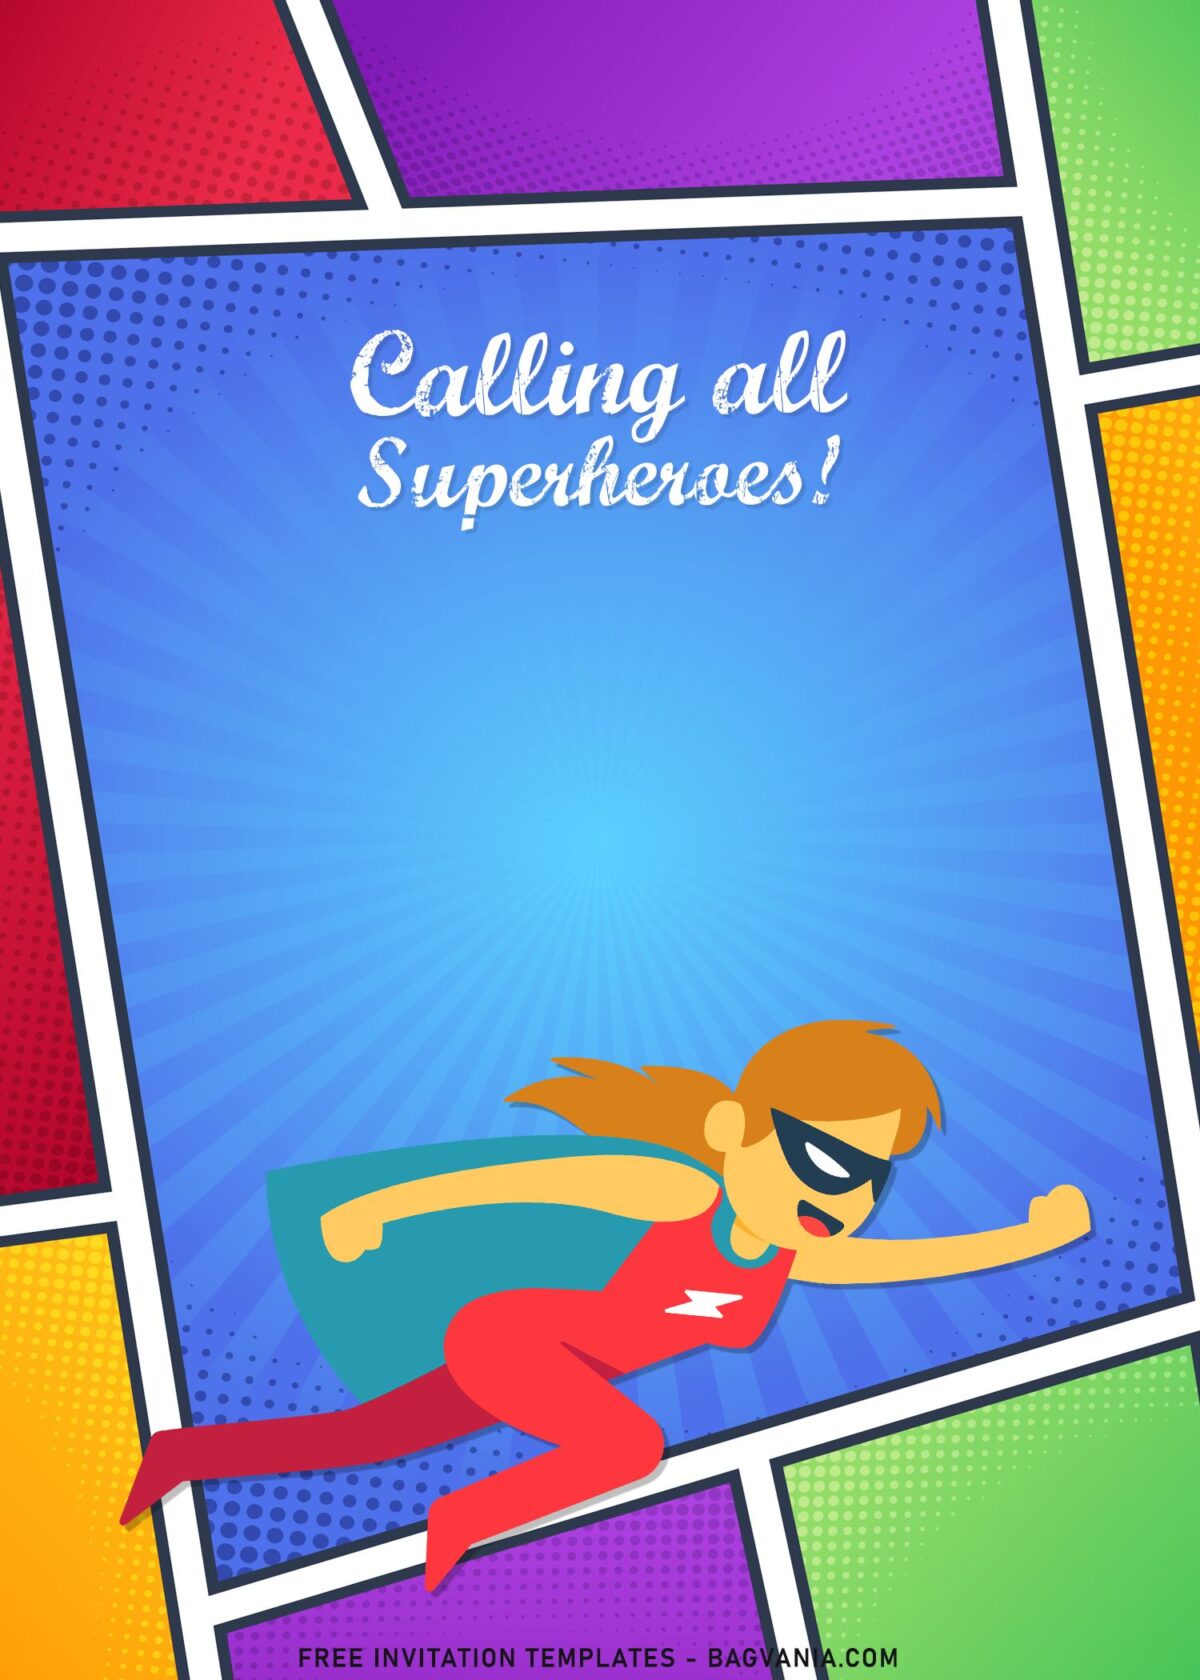 8+ Cool Superhero In Action Comic Themed Birthday Invitation Templates with blue sunburst background